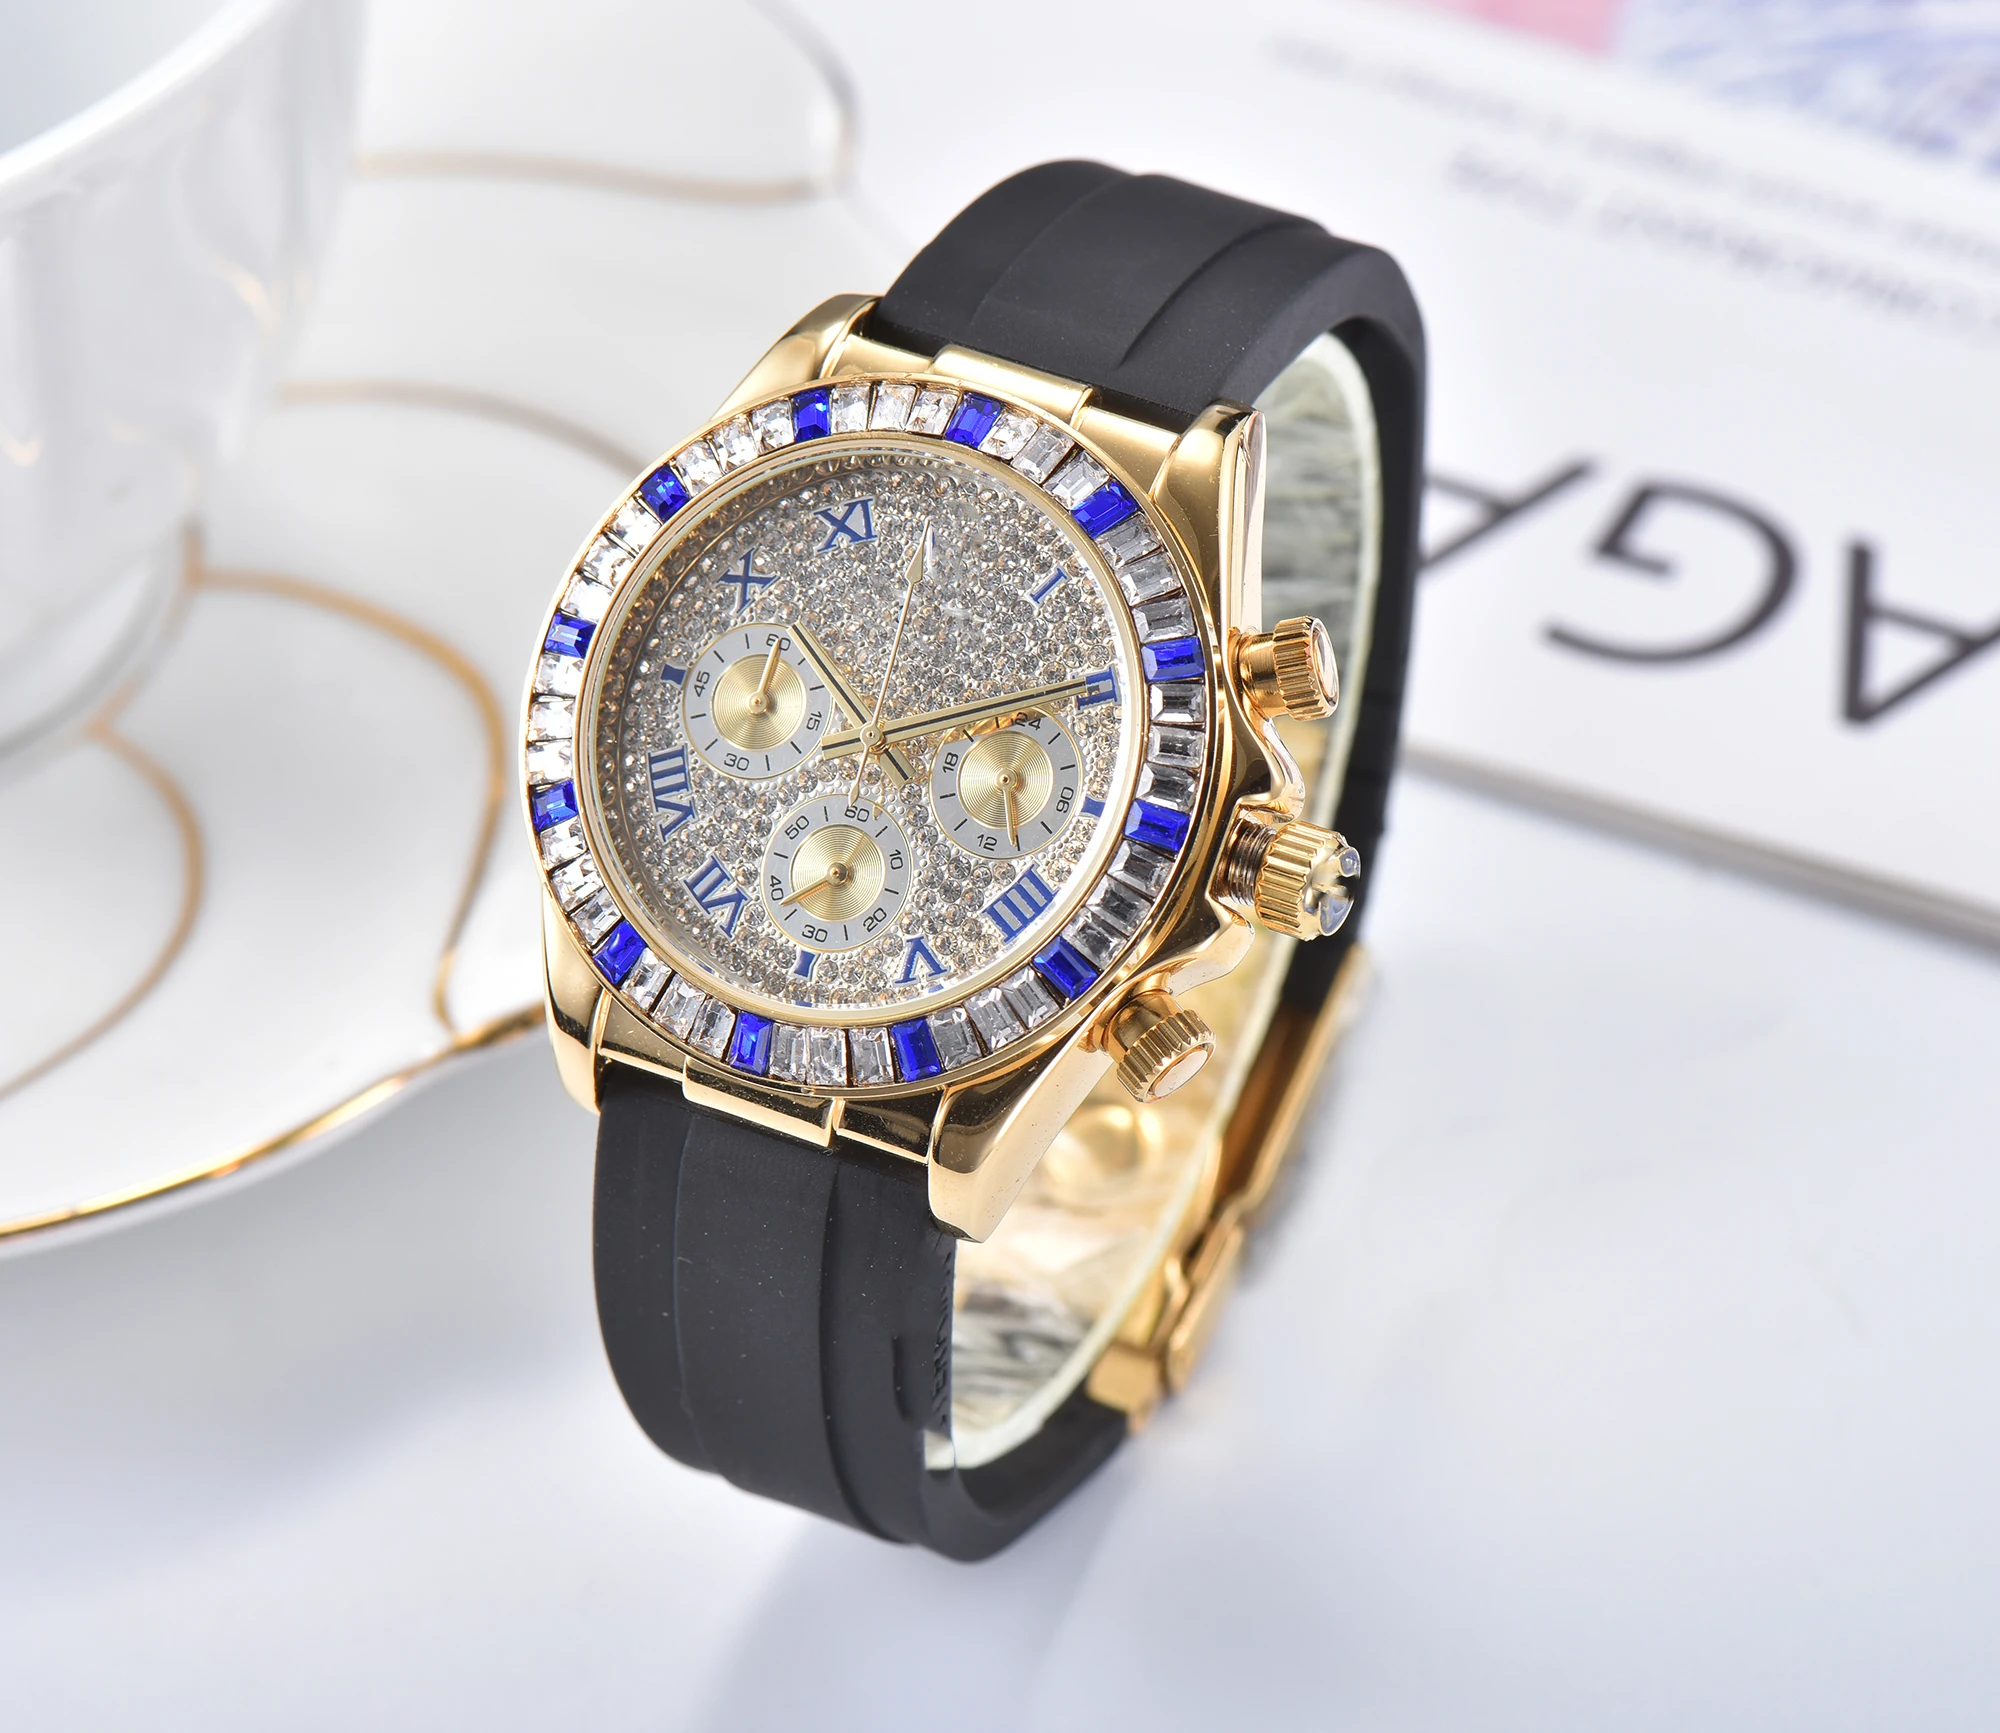 

Classic leather strap, round dial, full of diamonds, luxurious design, mechanical movement R, boutique production, men's casual